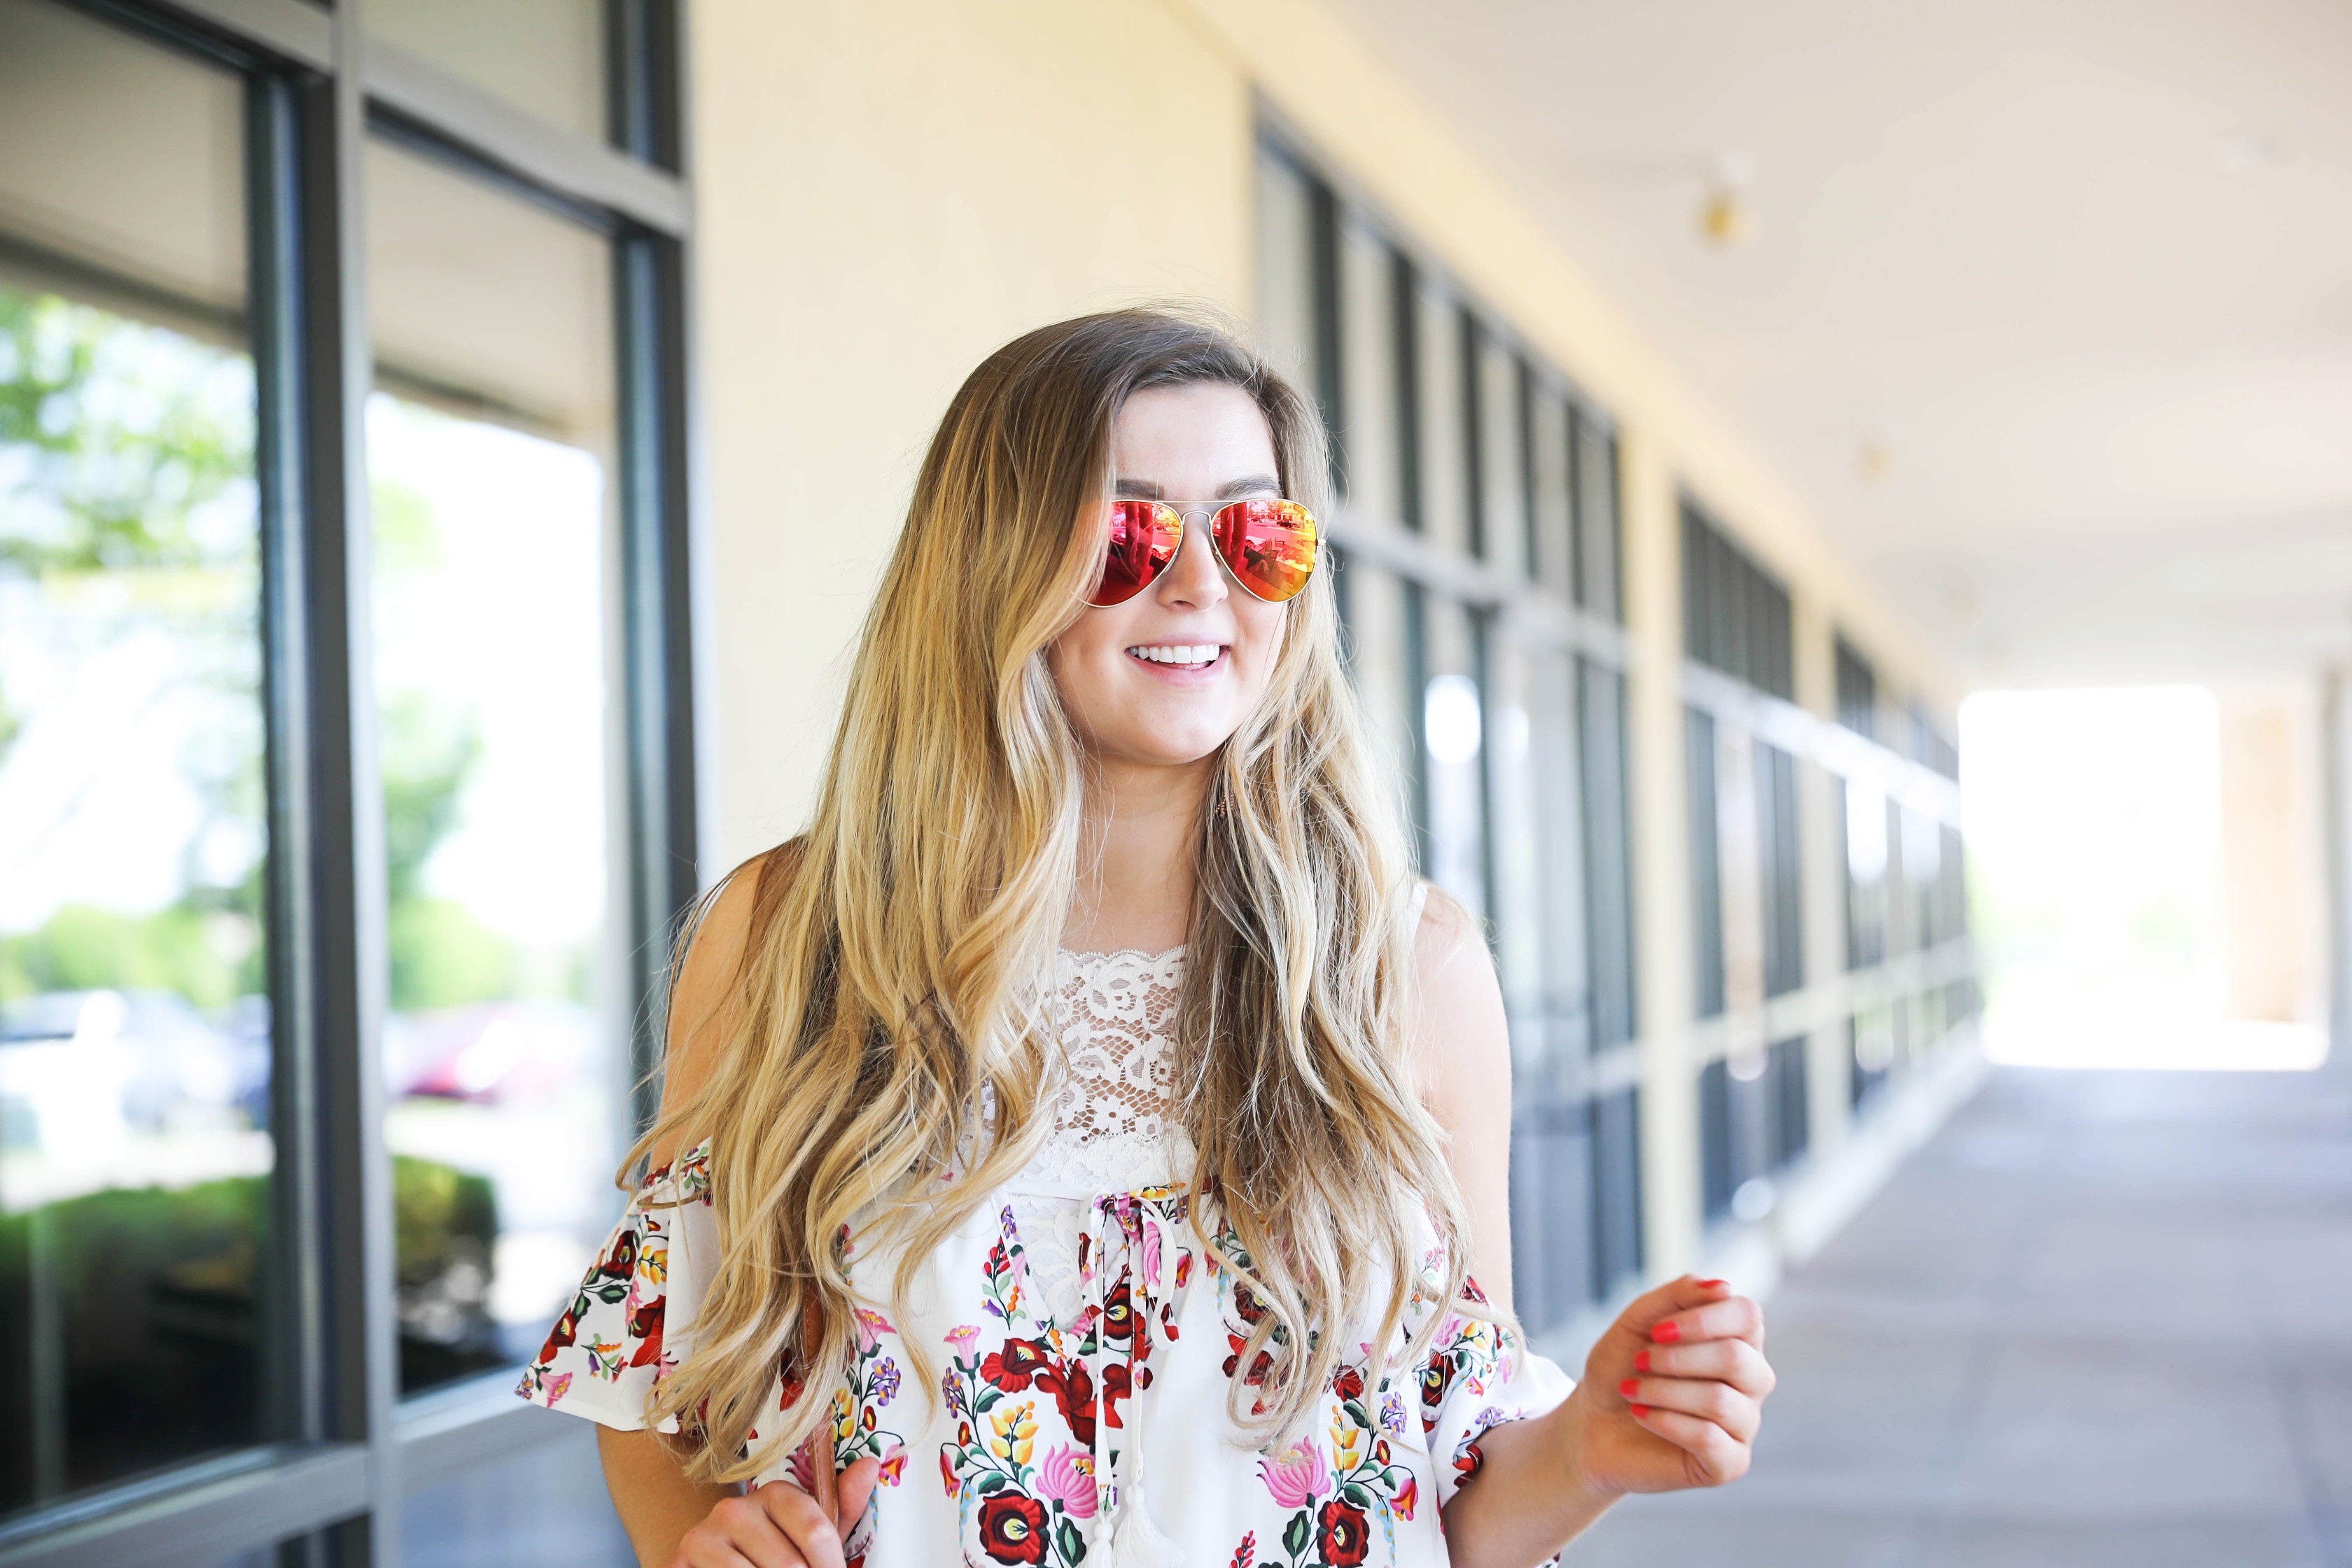 Floral MuMu Romper with lace bralette on Fashion Blog Daily Dose of Charm by Lauren Lindmark